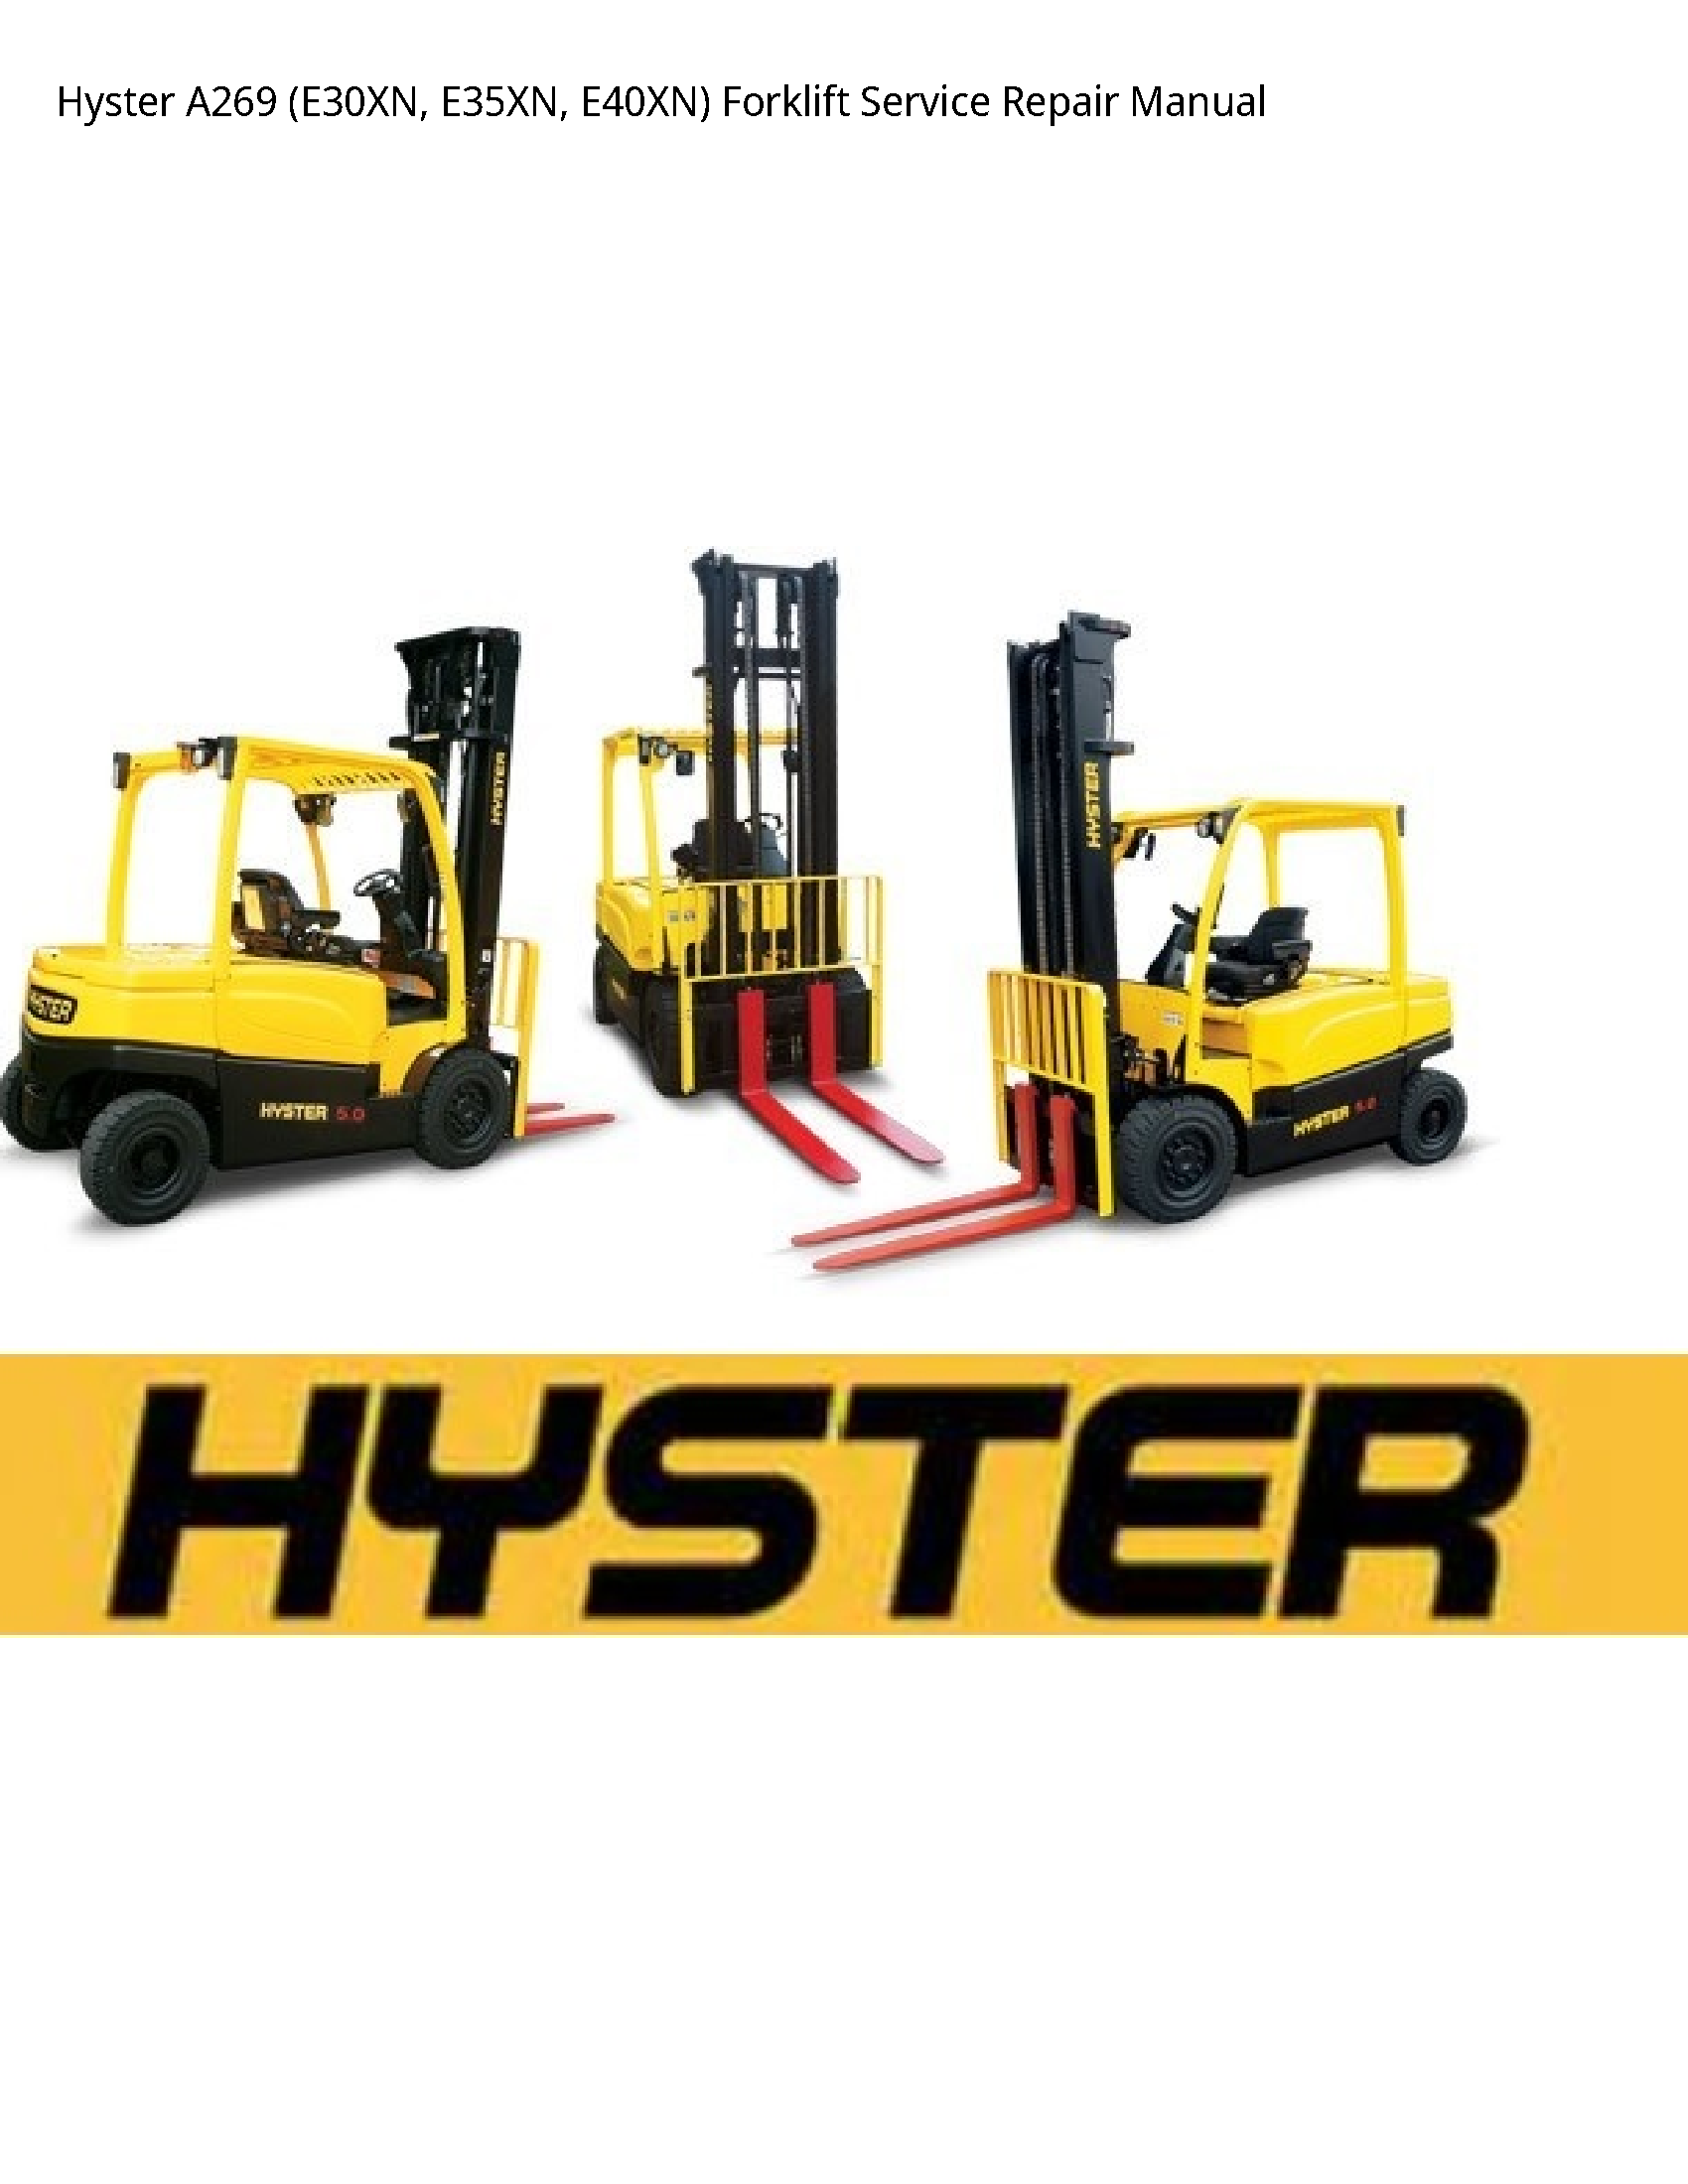 Hyster A269 Forklift manual